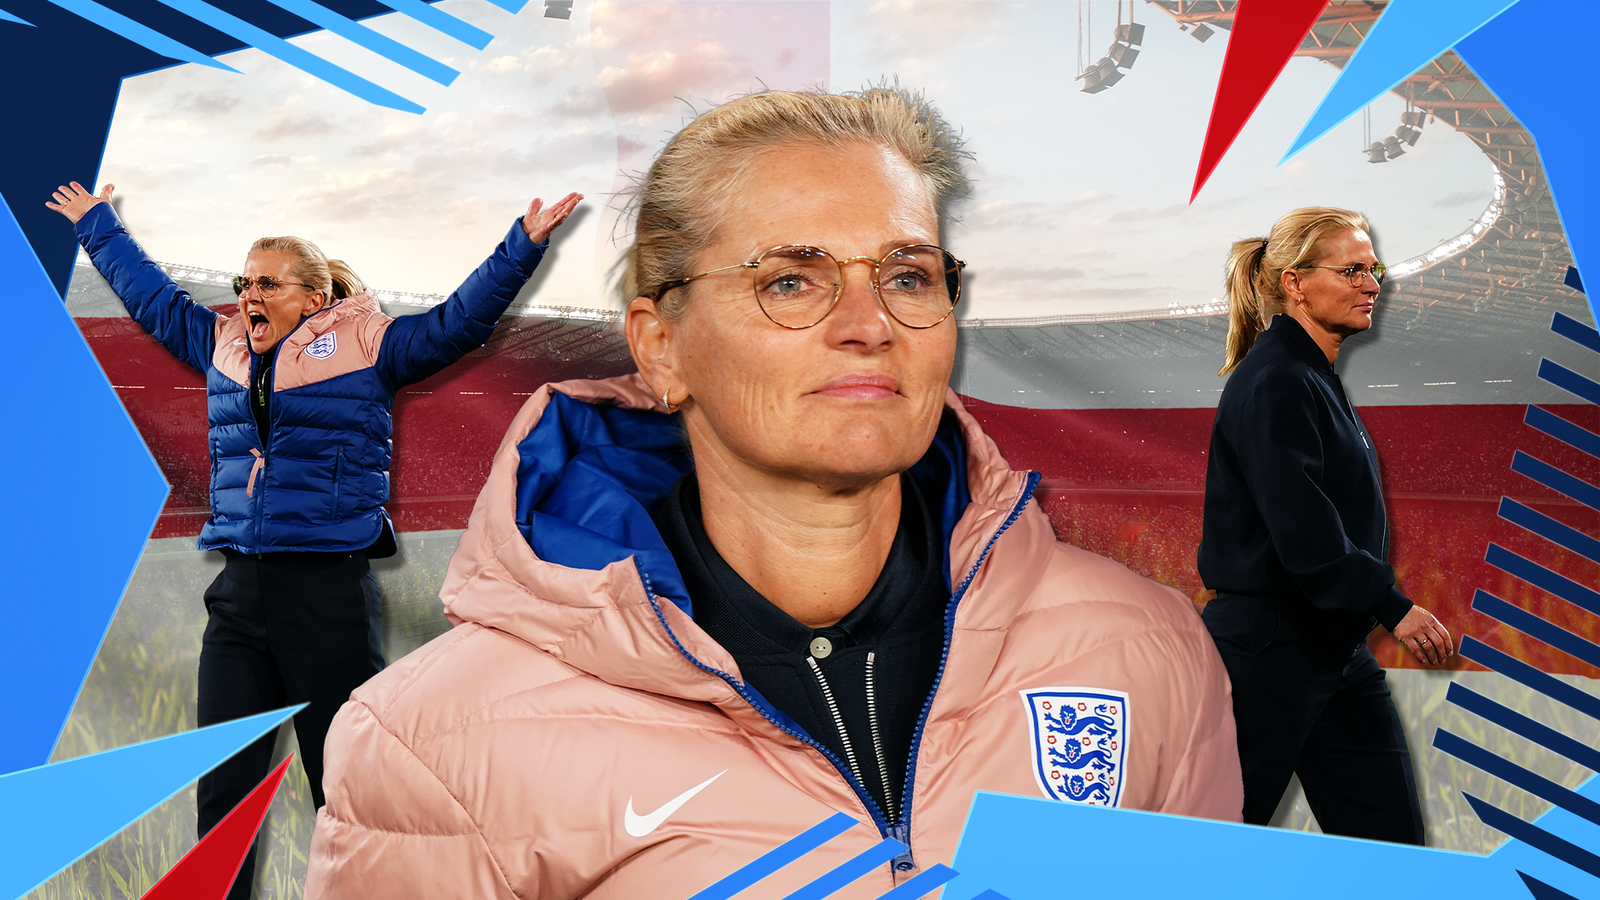 Sarina Wiegman: The 'genius' Lionesses coach hoping to end almost 60 years of World Cup hurt for England